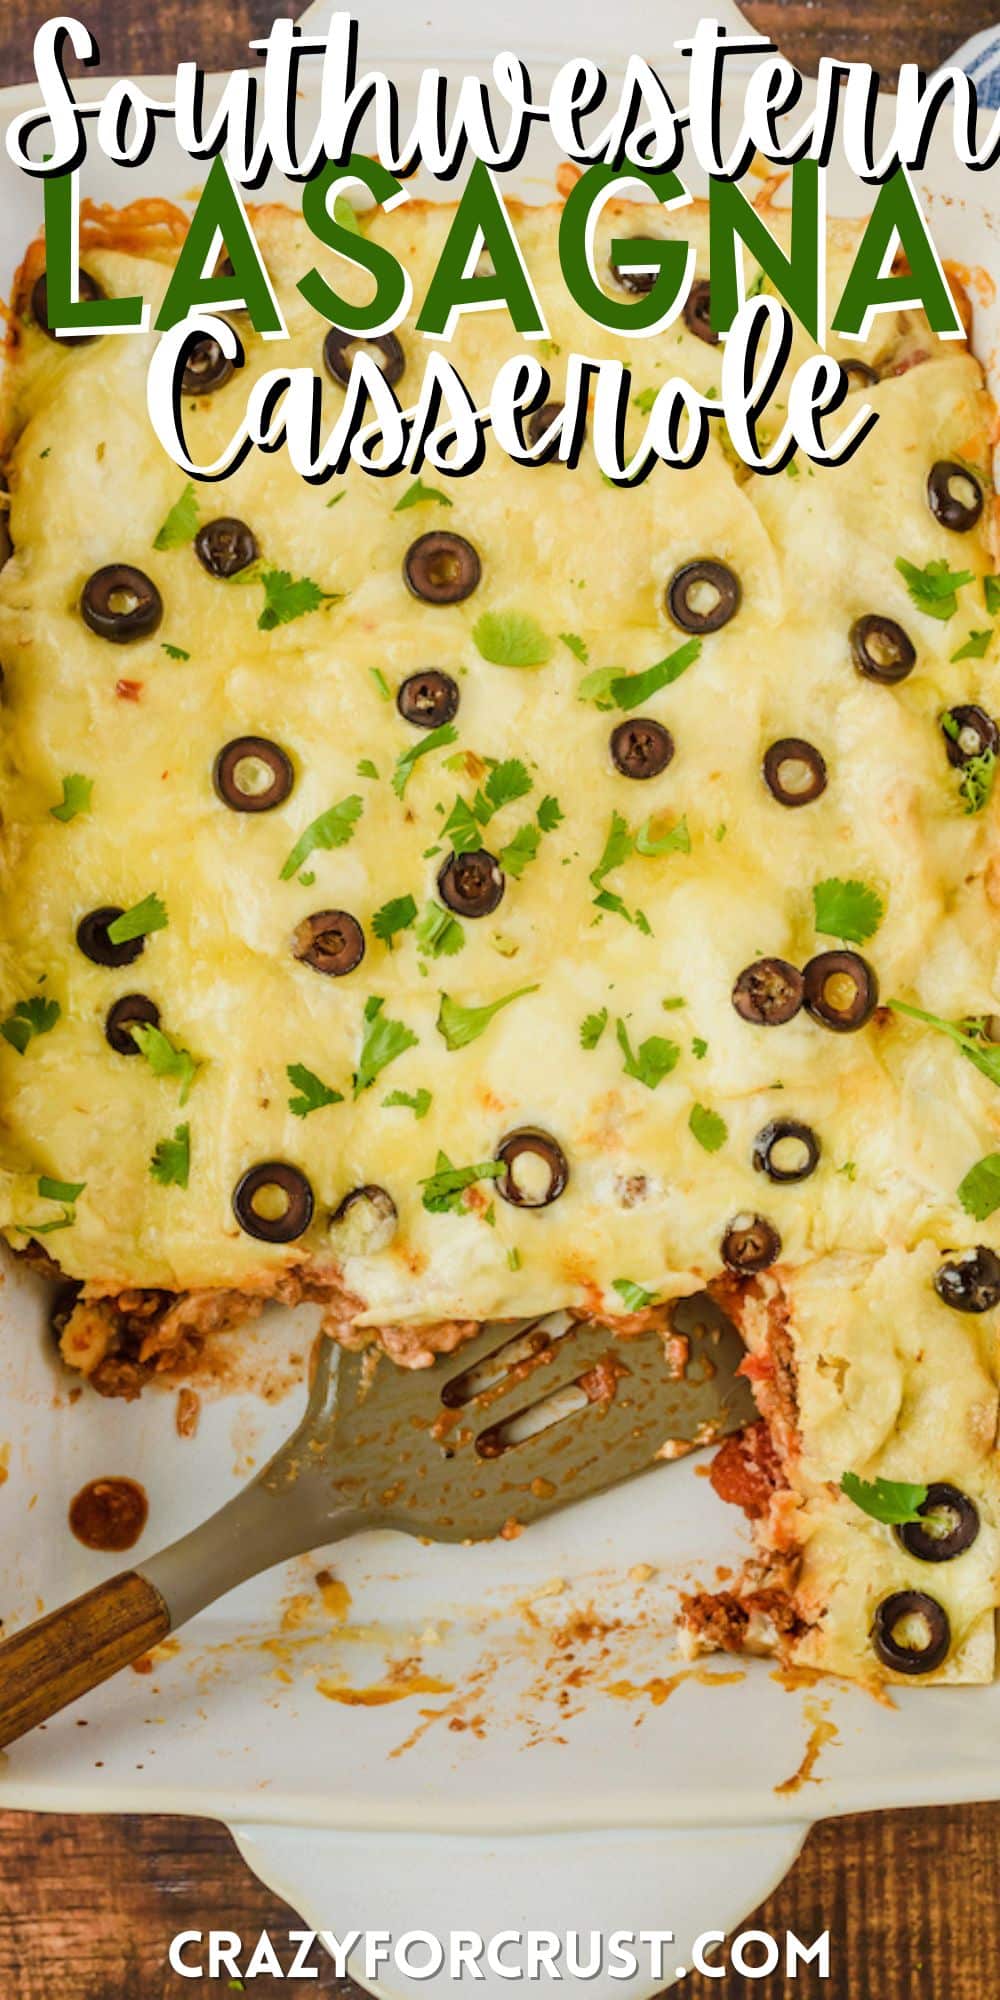 casserole with cheese and black olives and garnish on top in a white casserole pan with words on the image.